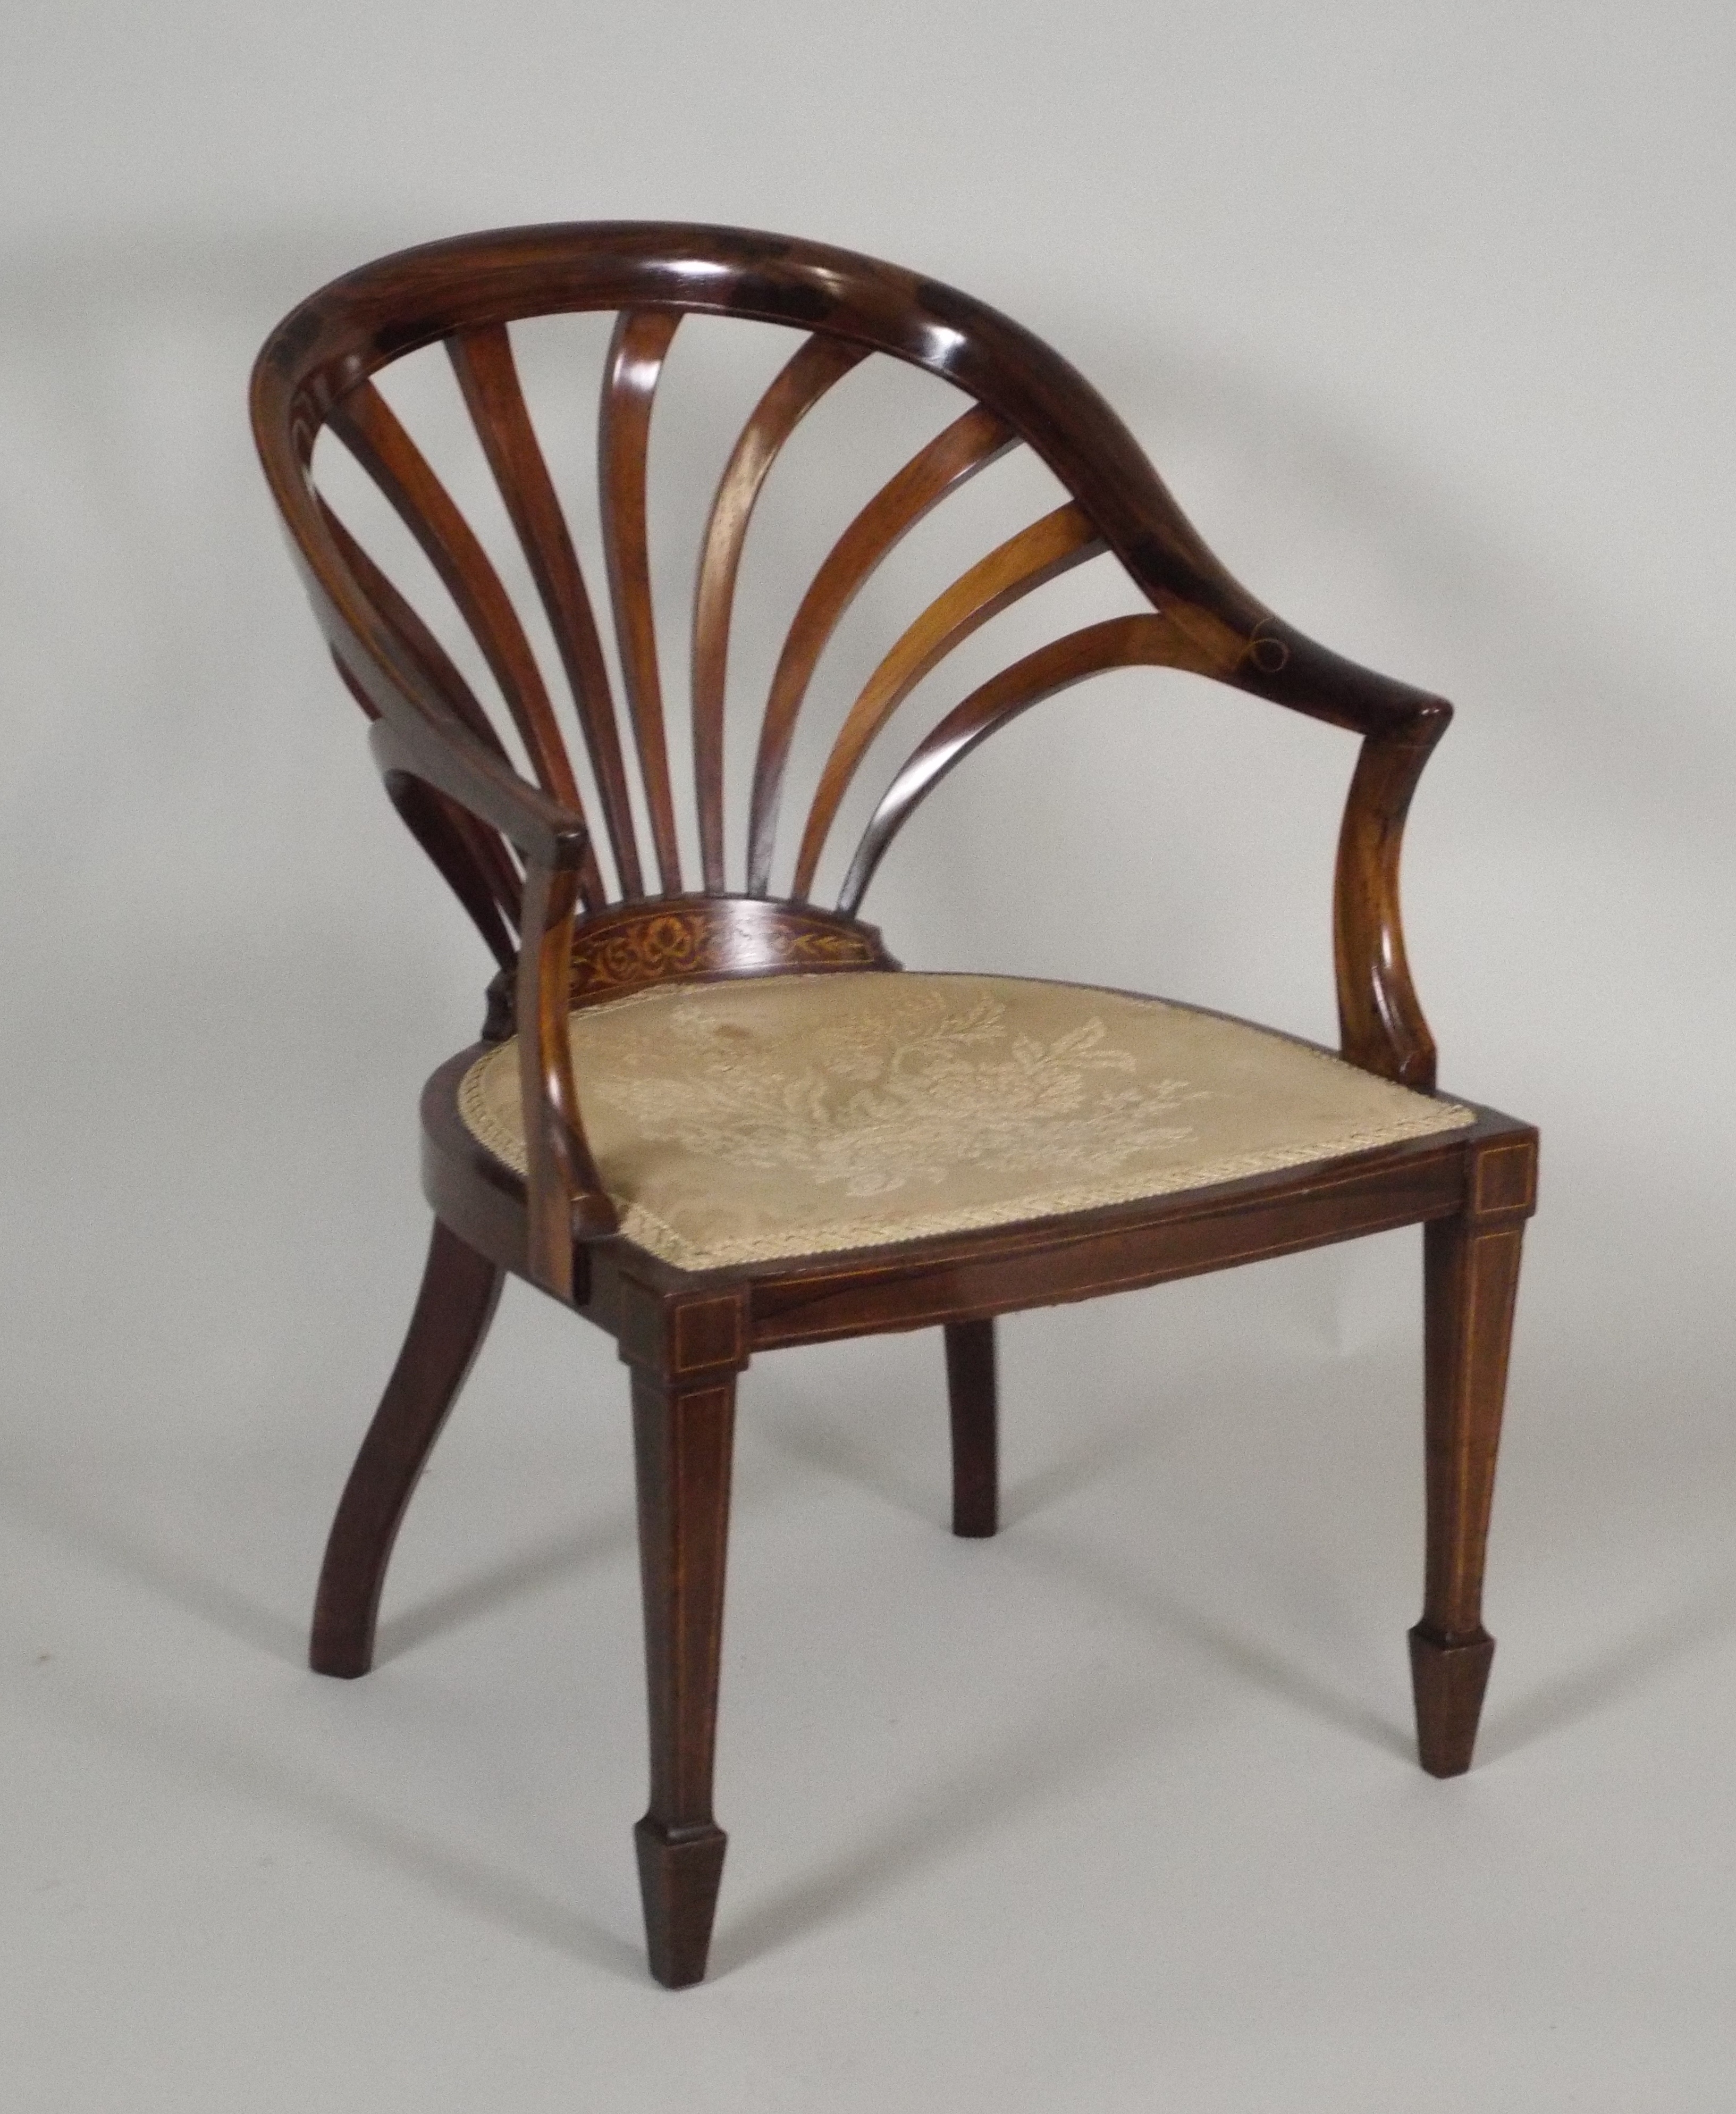 A late 19th/early 20th century rosewood and marquetry boxwood line strung, low tub chair, with fan